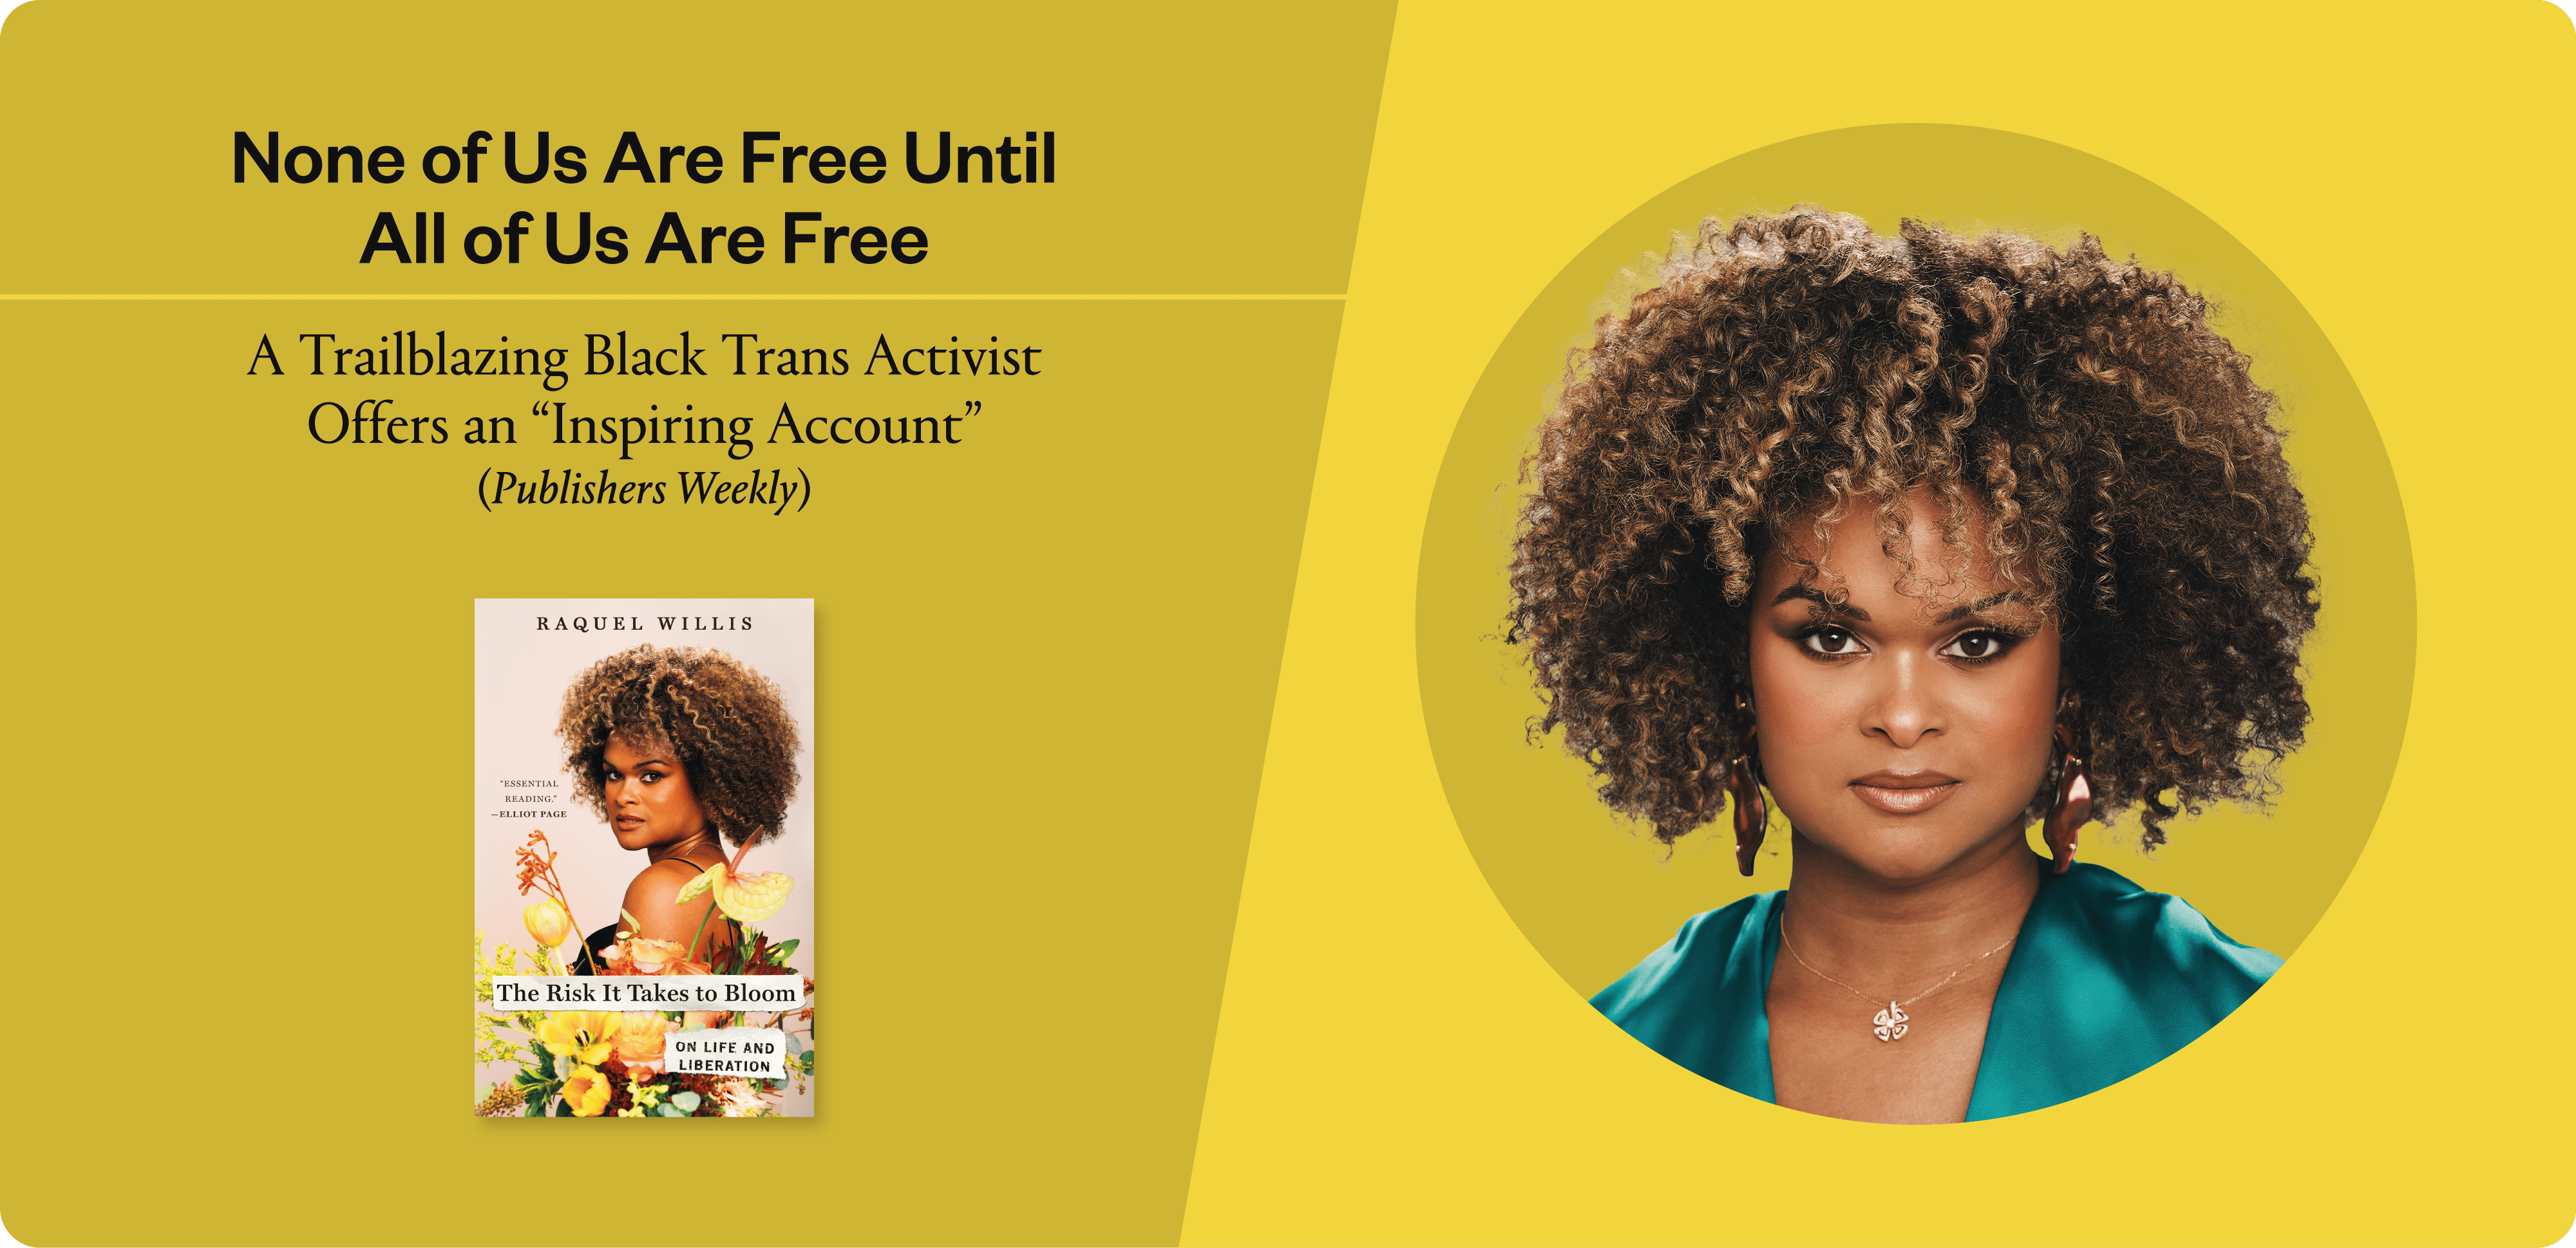 Prominent Black Trans Activist Raquel Willis Says We’re Not Free Until We’re All Free, in Her “Powerful New Memoir” (TIME)